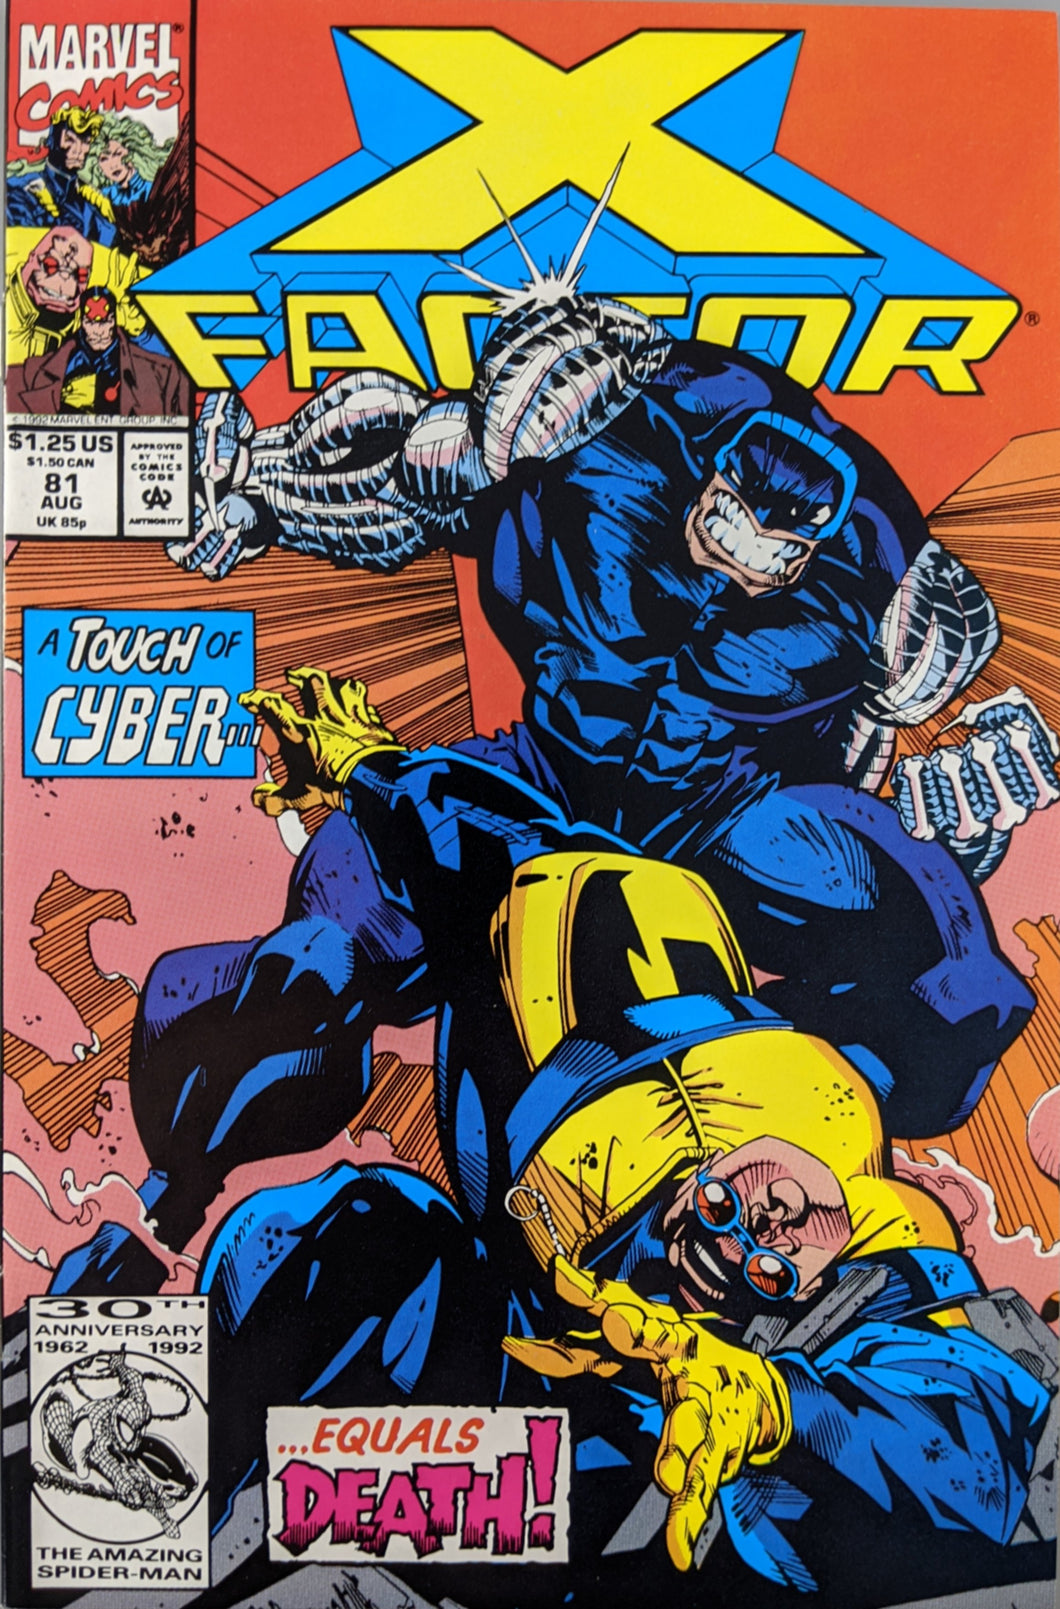 X-Factor #81 Comic Book Cover Art by Larry Stroman